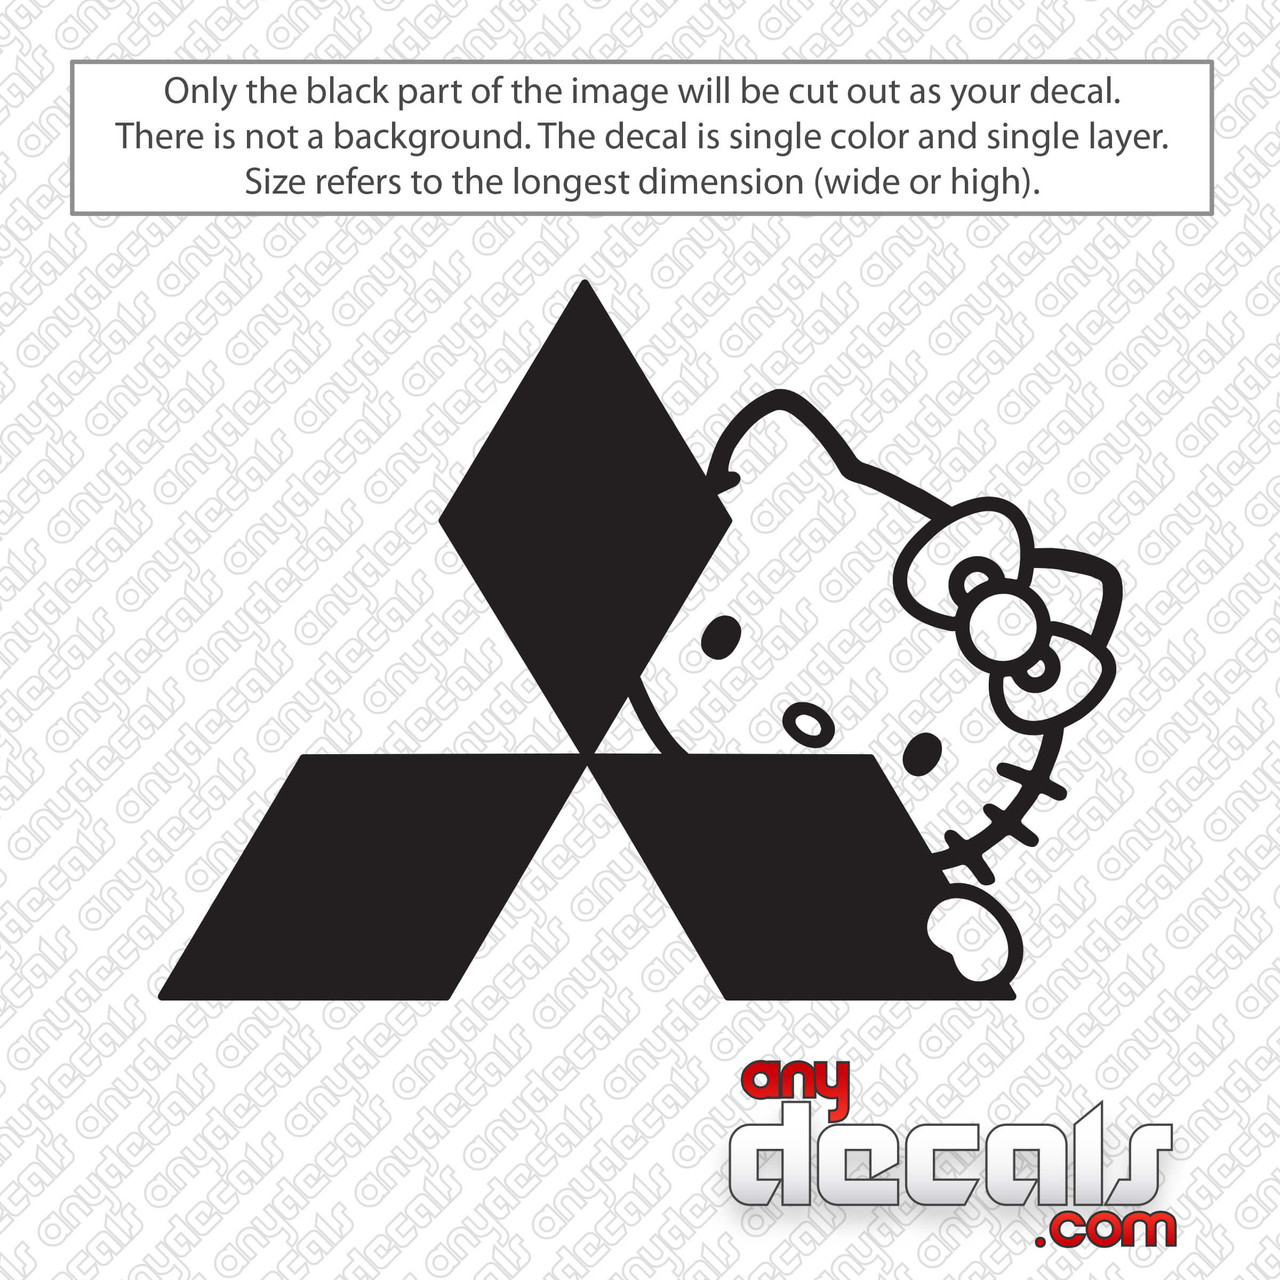 Mitsubishi, Racing, Sport, Vinyl Decal,Sticker for Car,Laptops and more